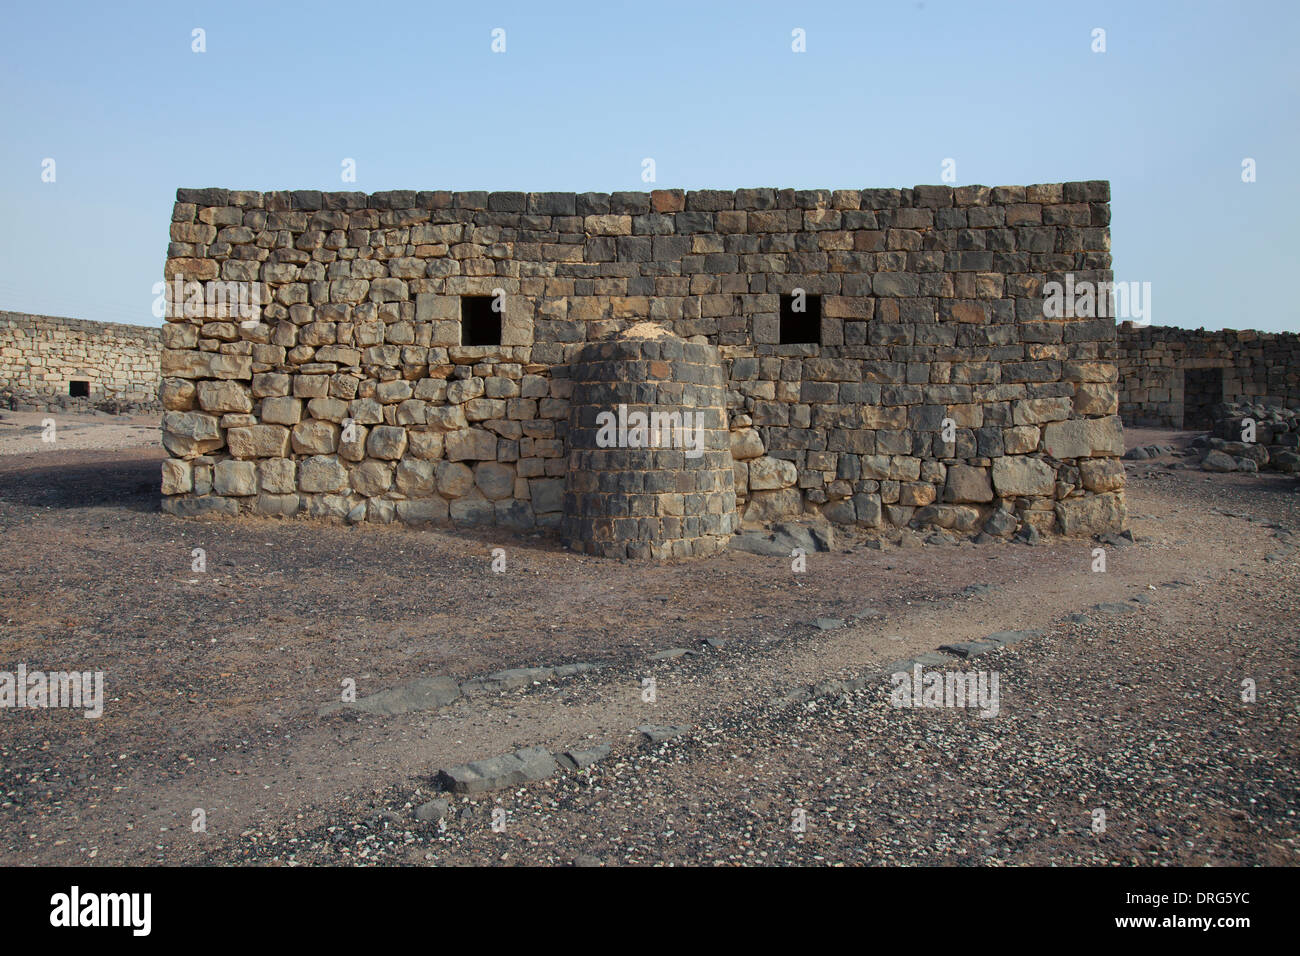 Ruins of Qasr al-Azraq built by the Ayyubids in the 13th century using locally quarried basalt located in the province of Zarqa Governorate in central-eastern Jordan Stock Photo